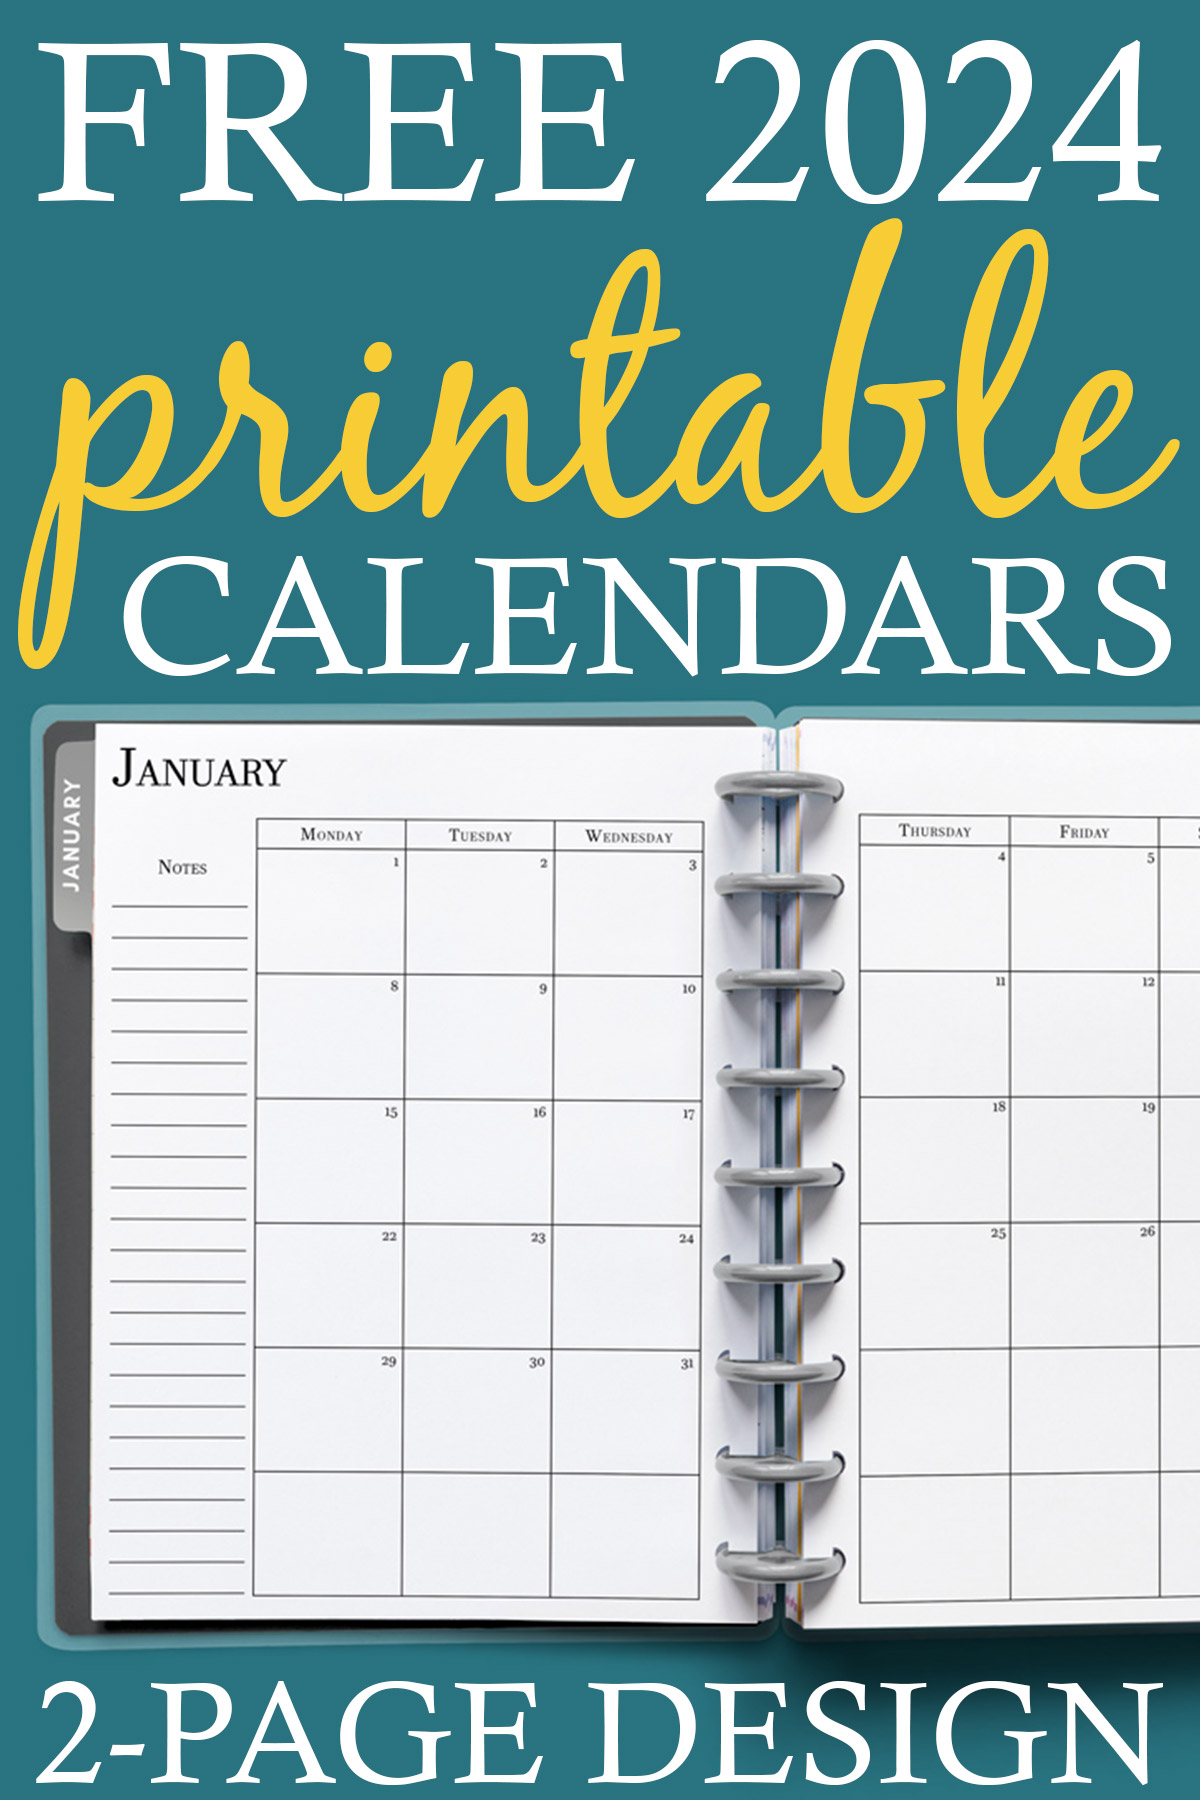 At the top it says free 2024 printable calendars. On the bottom it says two page design. In the middle, the image is of the 2024 free printable calendar you can download for free in this blog post. It is inside of an open planner on the month of January.